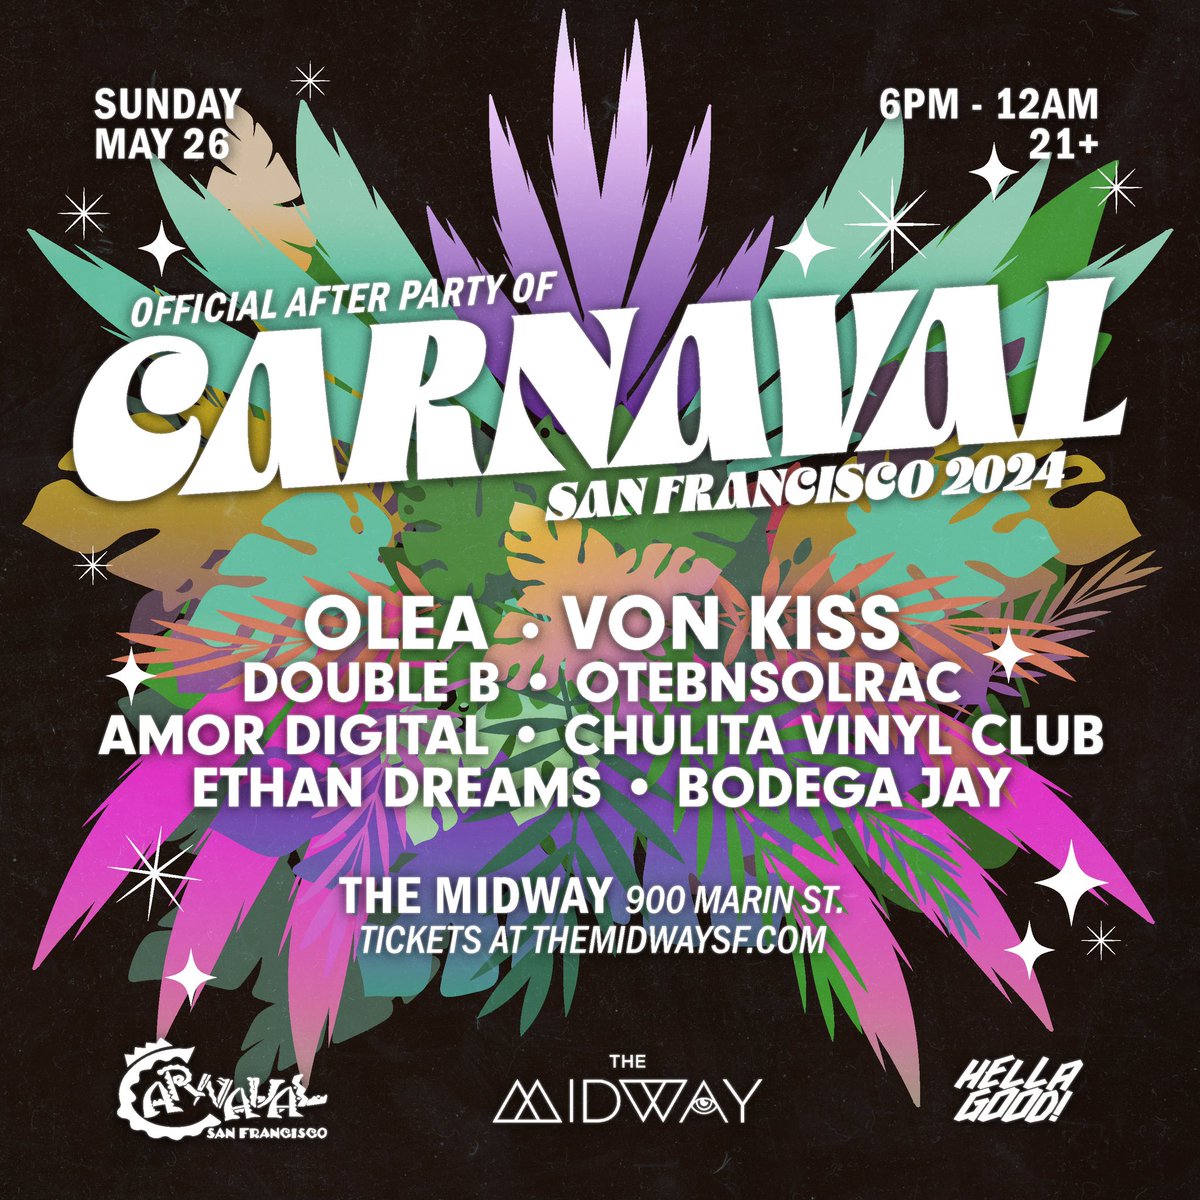 🚨 ANNOUNCEMENT 🚨

Official After Party of Carnaval SF 

MEMORIAL DAY WEEKEND! 
Sun, May 26th - 6pm to Midnight 

The Midway - 900 Marin St. SF

Olea 
Von Kiss
Double B
OtebNSolrac
Amor Digital
Chulita Vinyl Club
Ethan Dreams
Bodega Jay

Early Bird Tix: tixr.com/groups/midways…